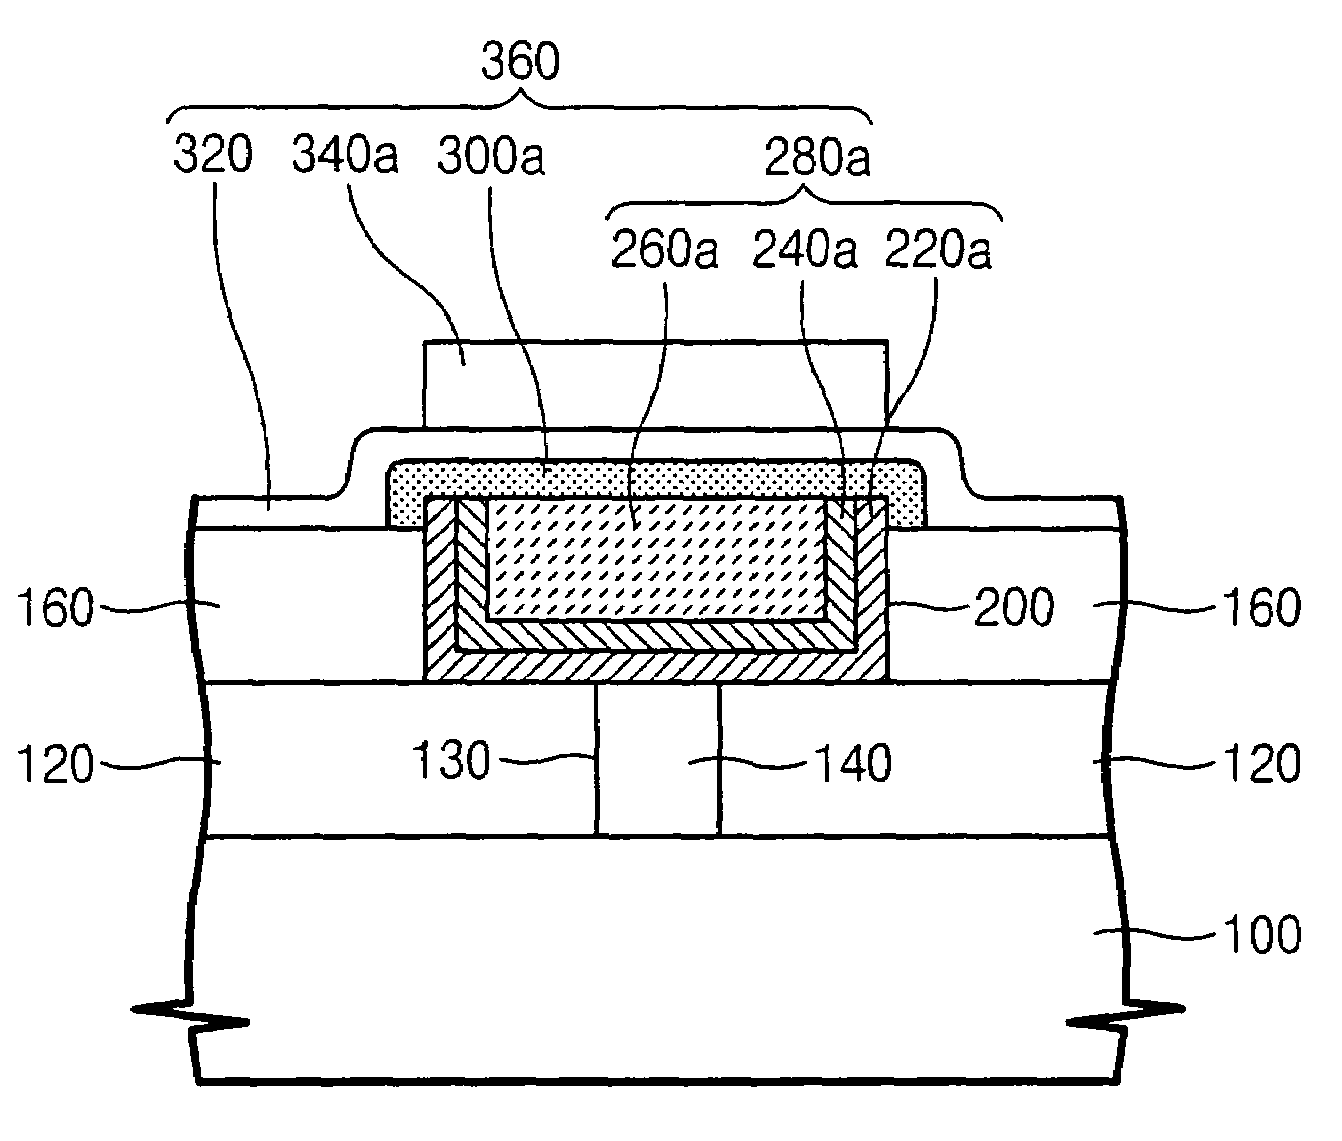 Ferroelectric capacitors including a seed conductive film